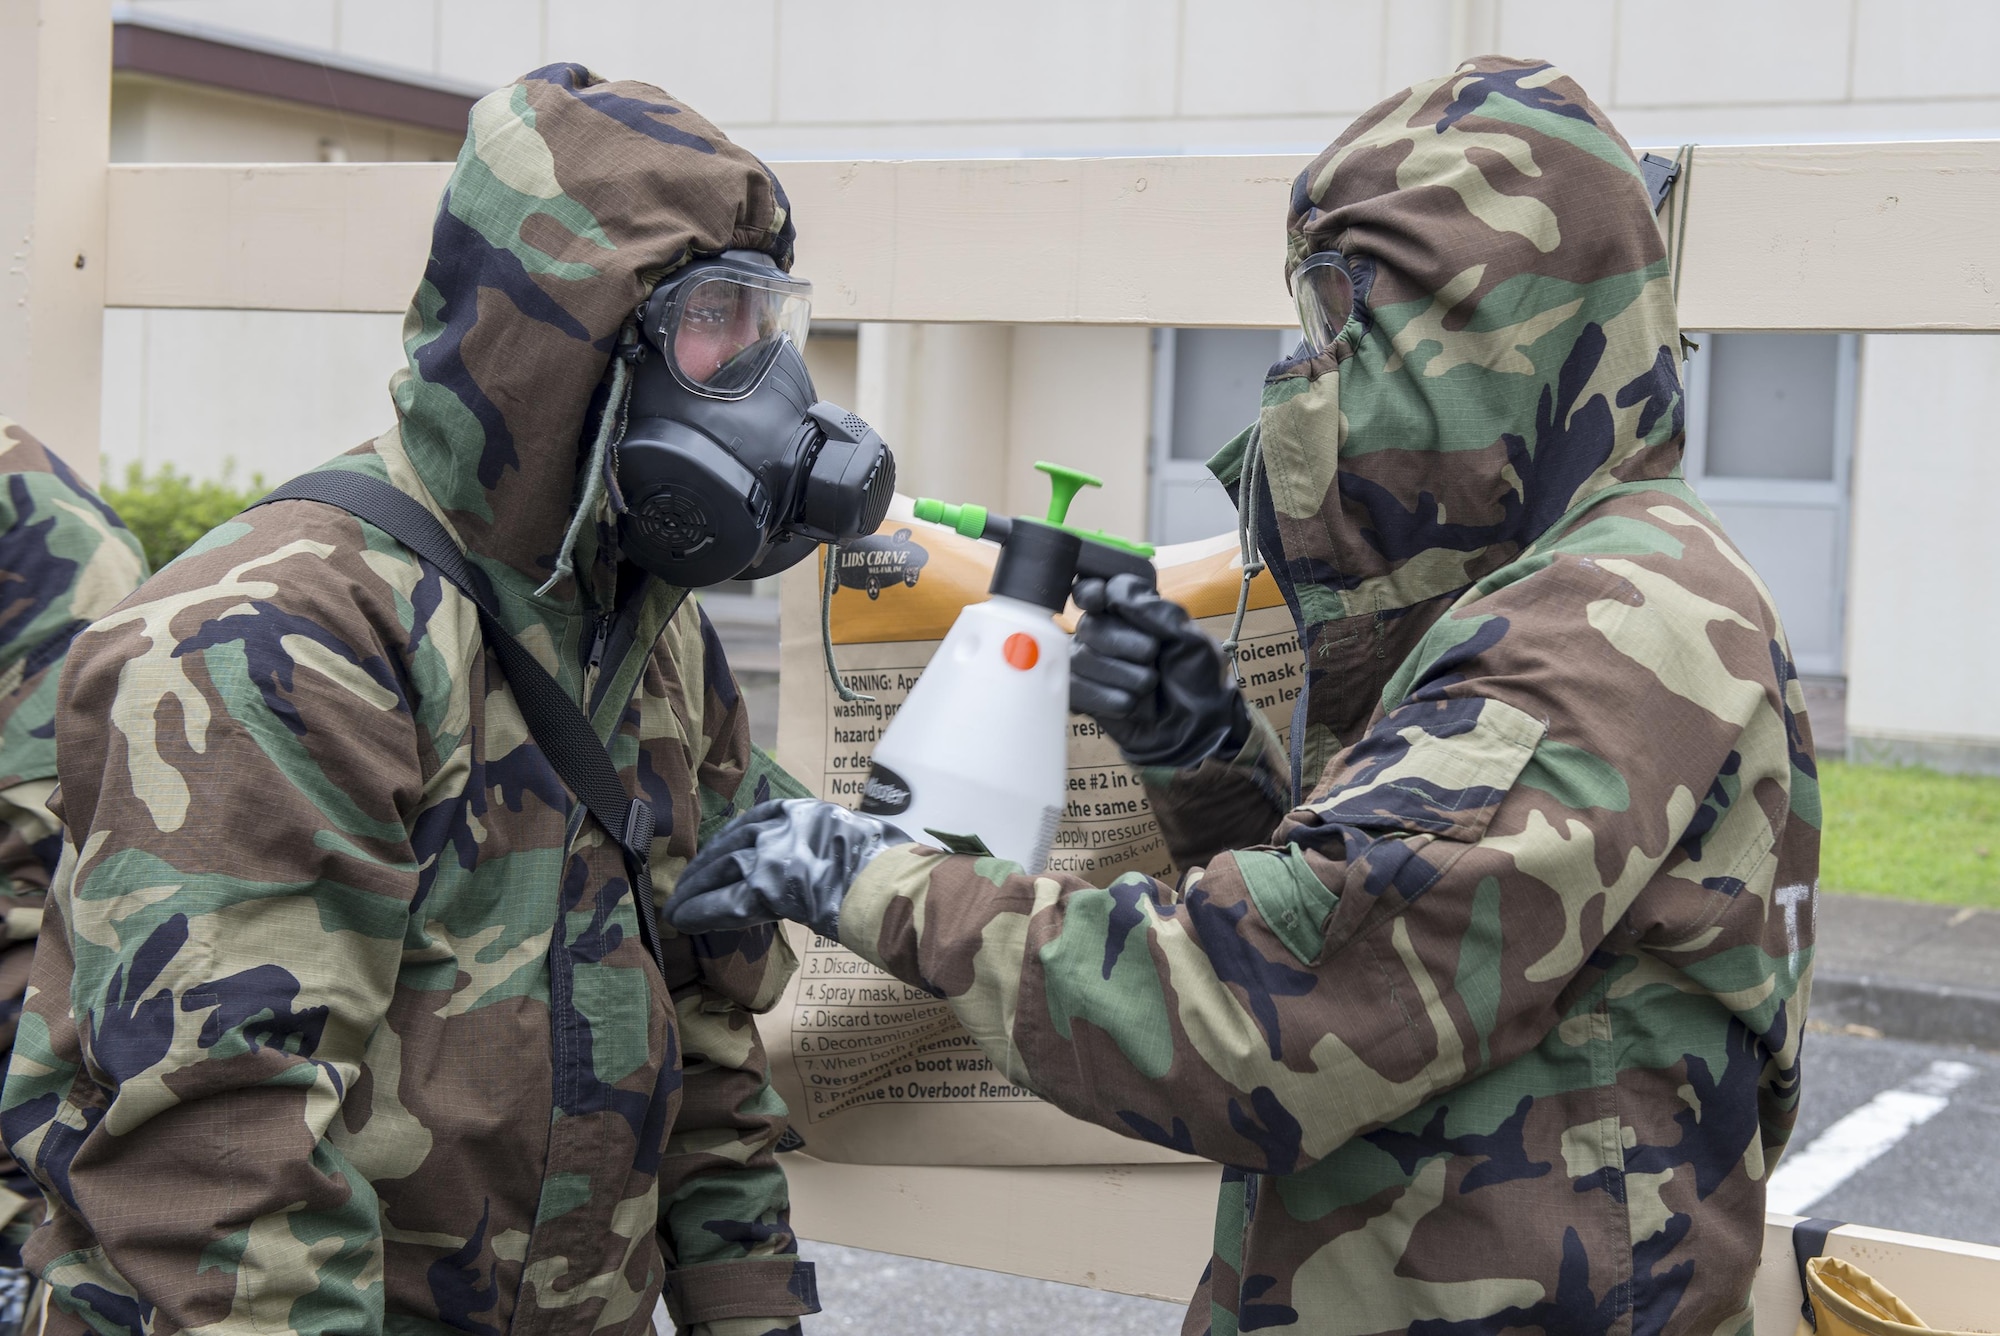 Airmen pass through a decontamination station during a Chemical, Biological, Radiological, Nuclear and Explosives defense class at the Camp Warlord training ground at Yokota Air Base, Japan, Aug. 10, 2016. The Airmen practiced CBRNE response, decontamination procedures and how to properly shelter-in-place. (U.S. Air Force photo by Senior Airman David C. Danford/Released)